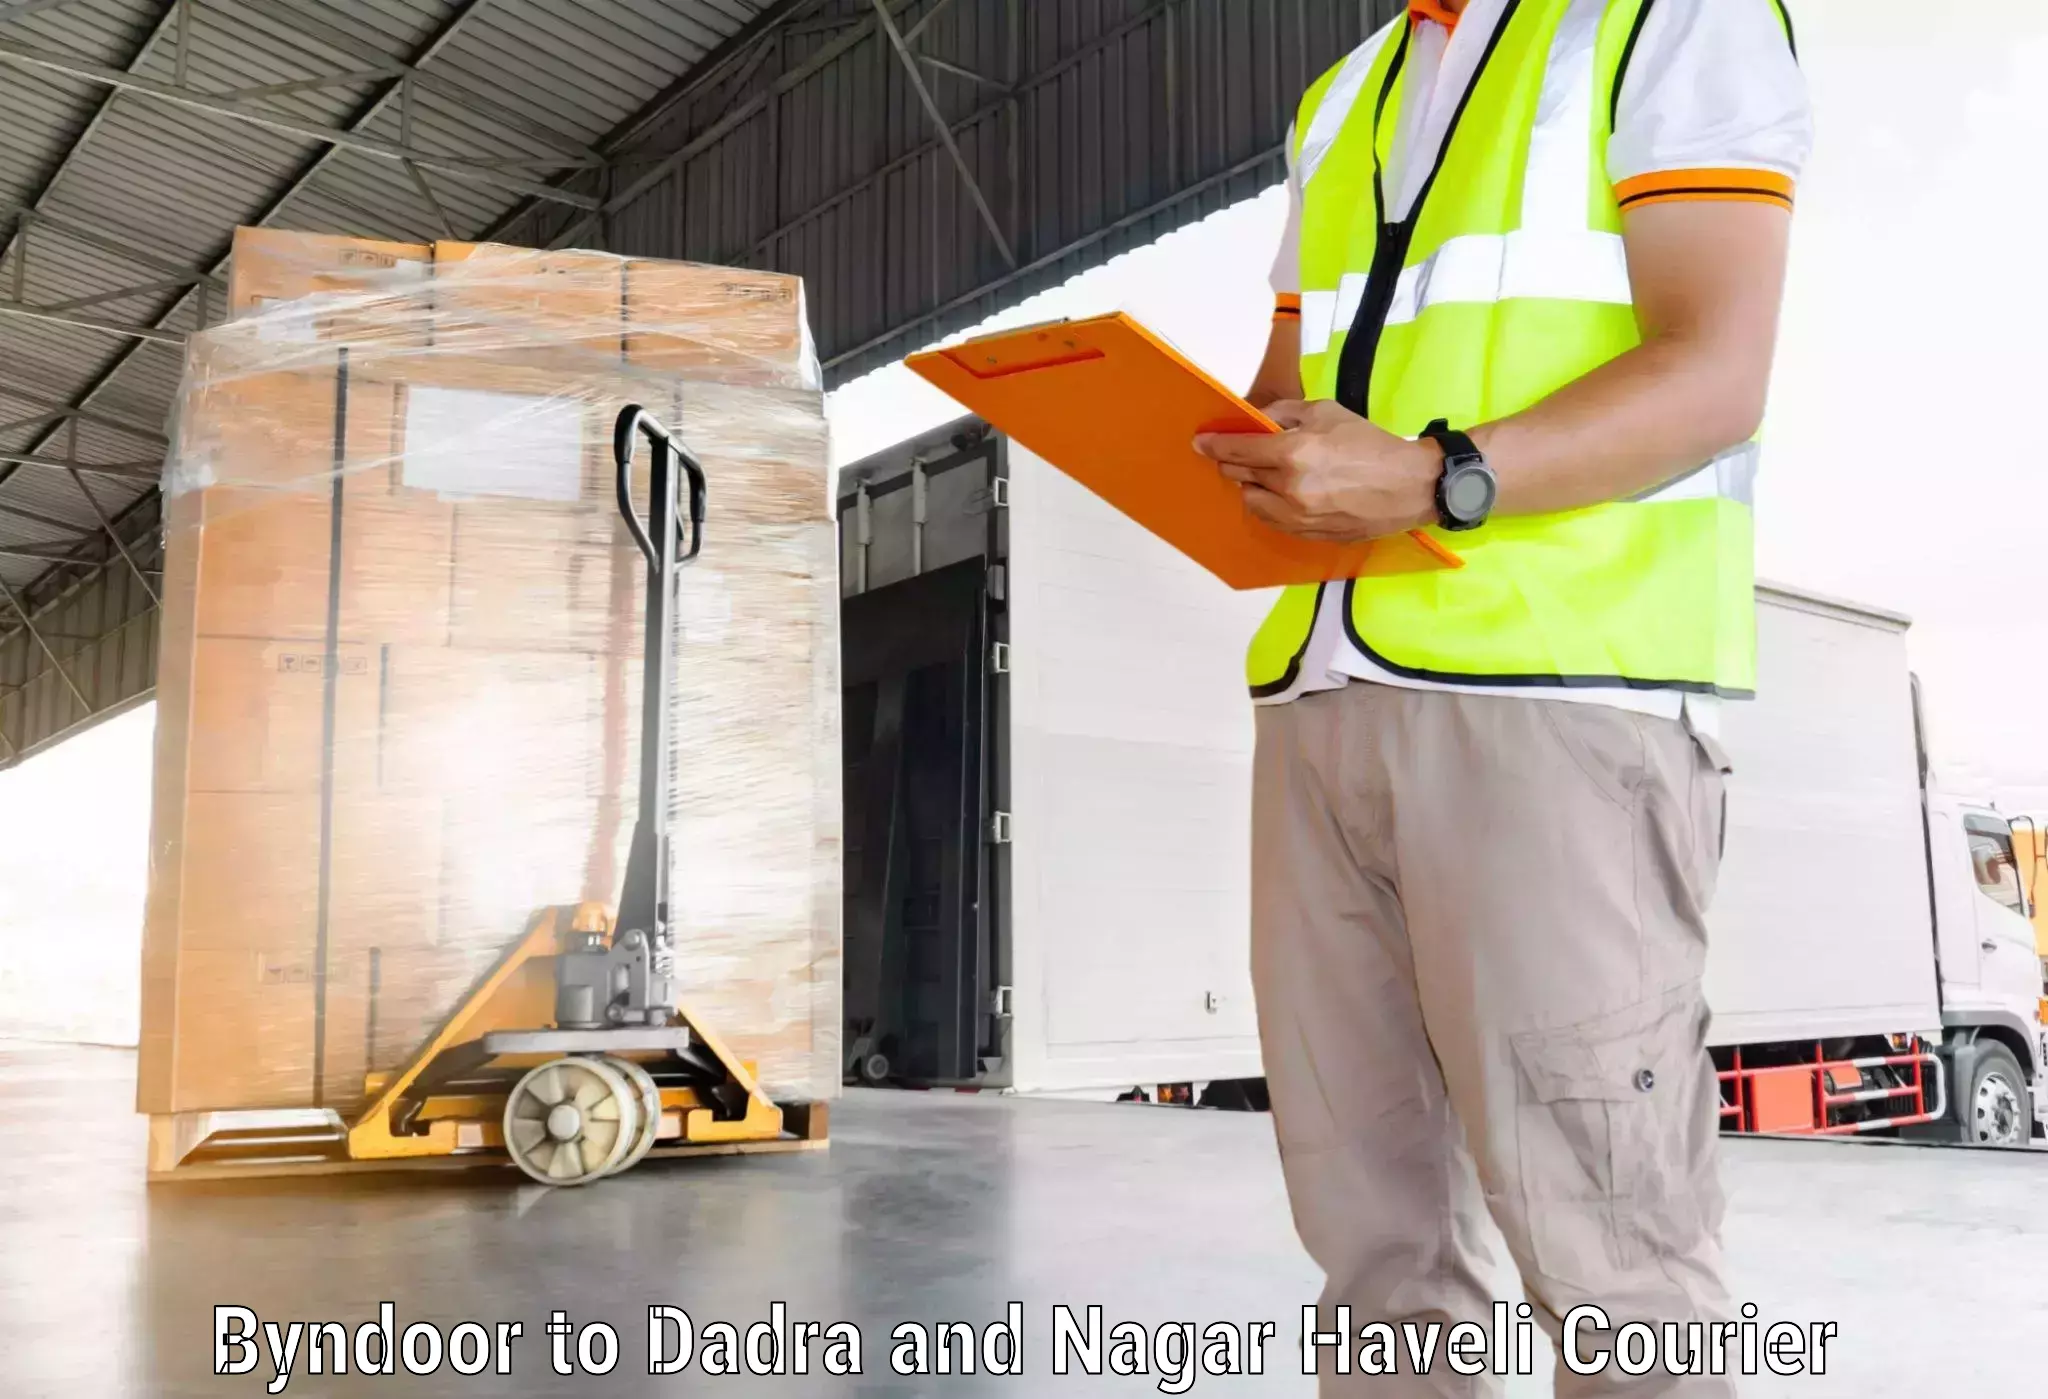 Ocean freight courier Byndoor to Dadra and Nagar Haveli